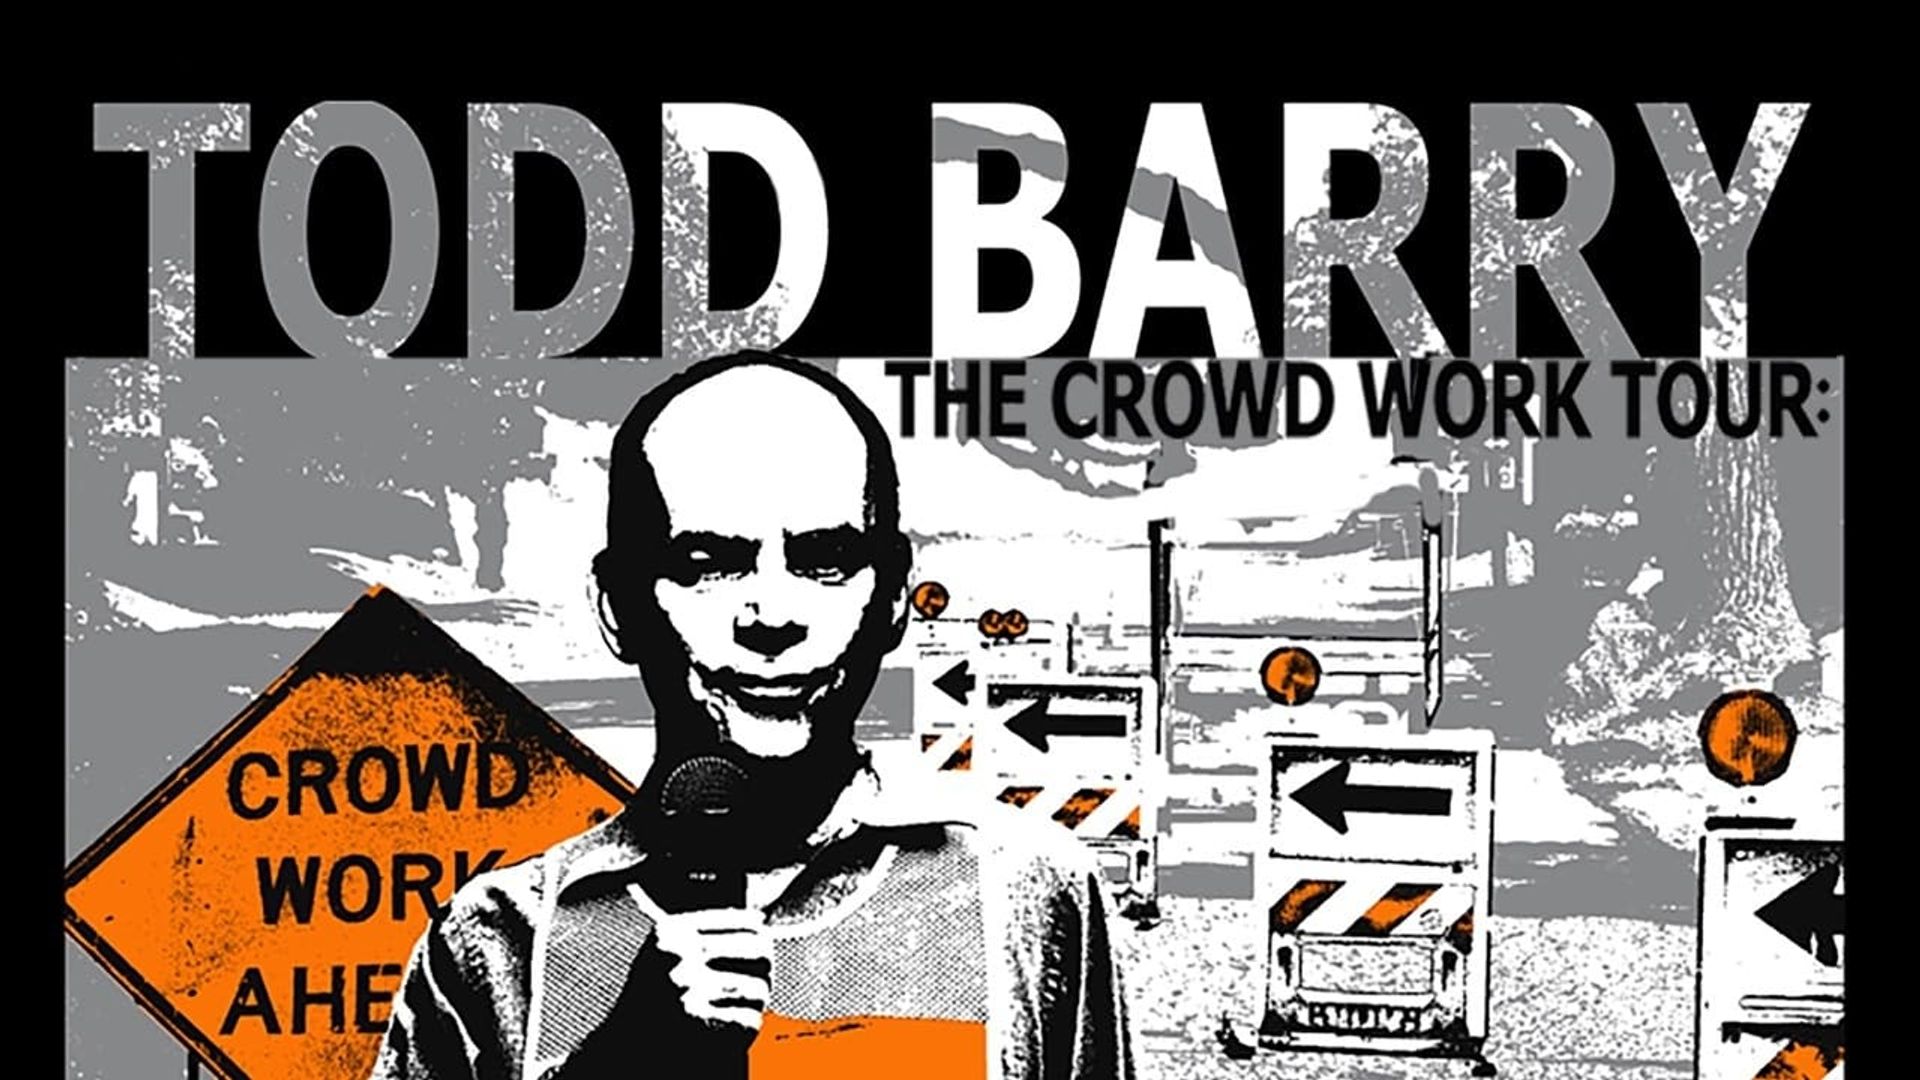 Todd Barry: The Crowd Work Tour background